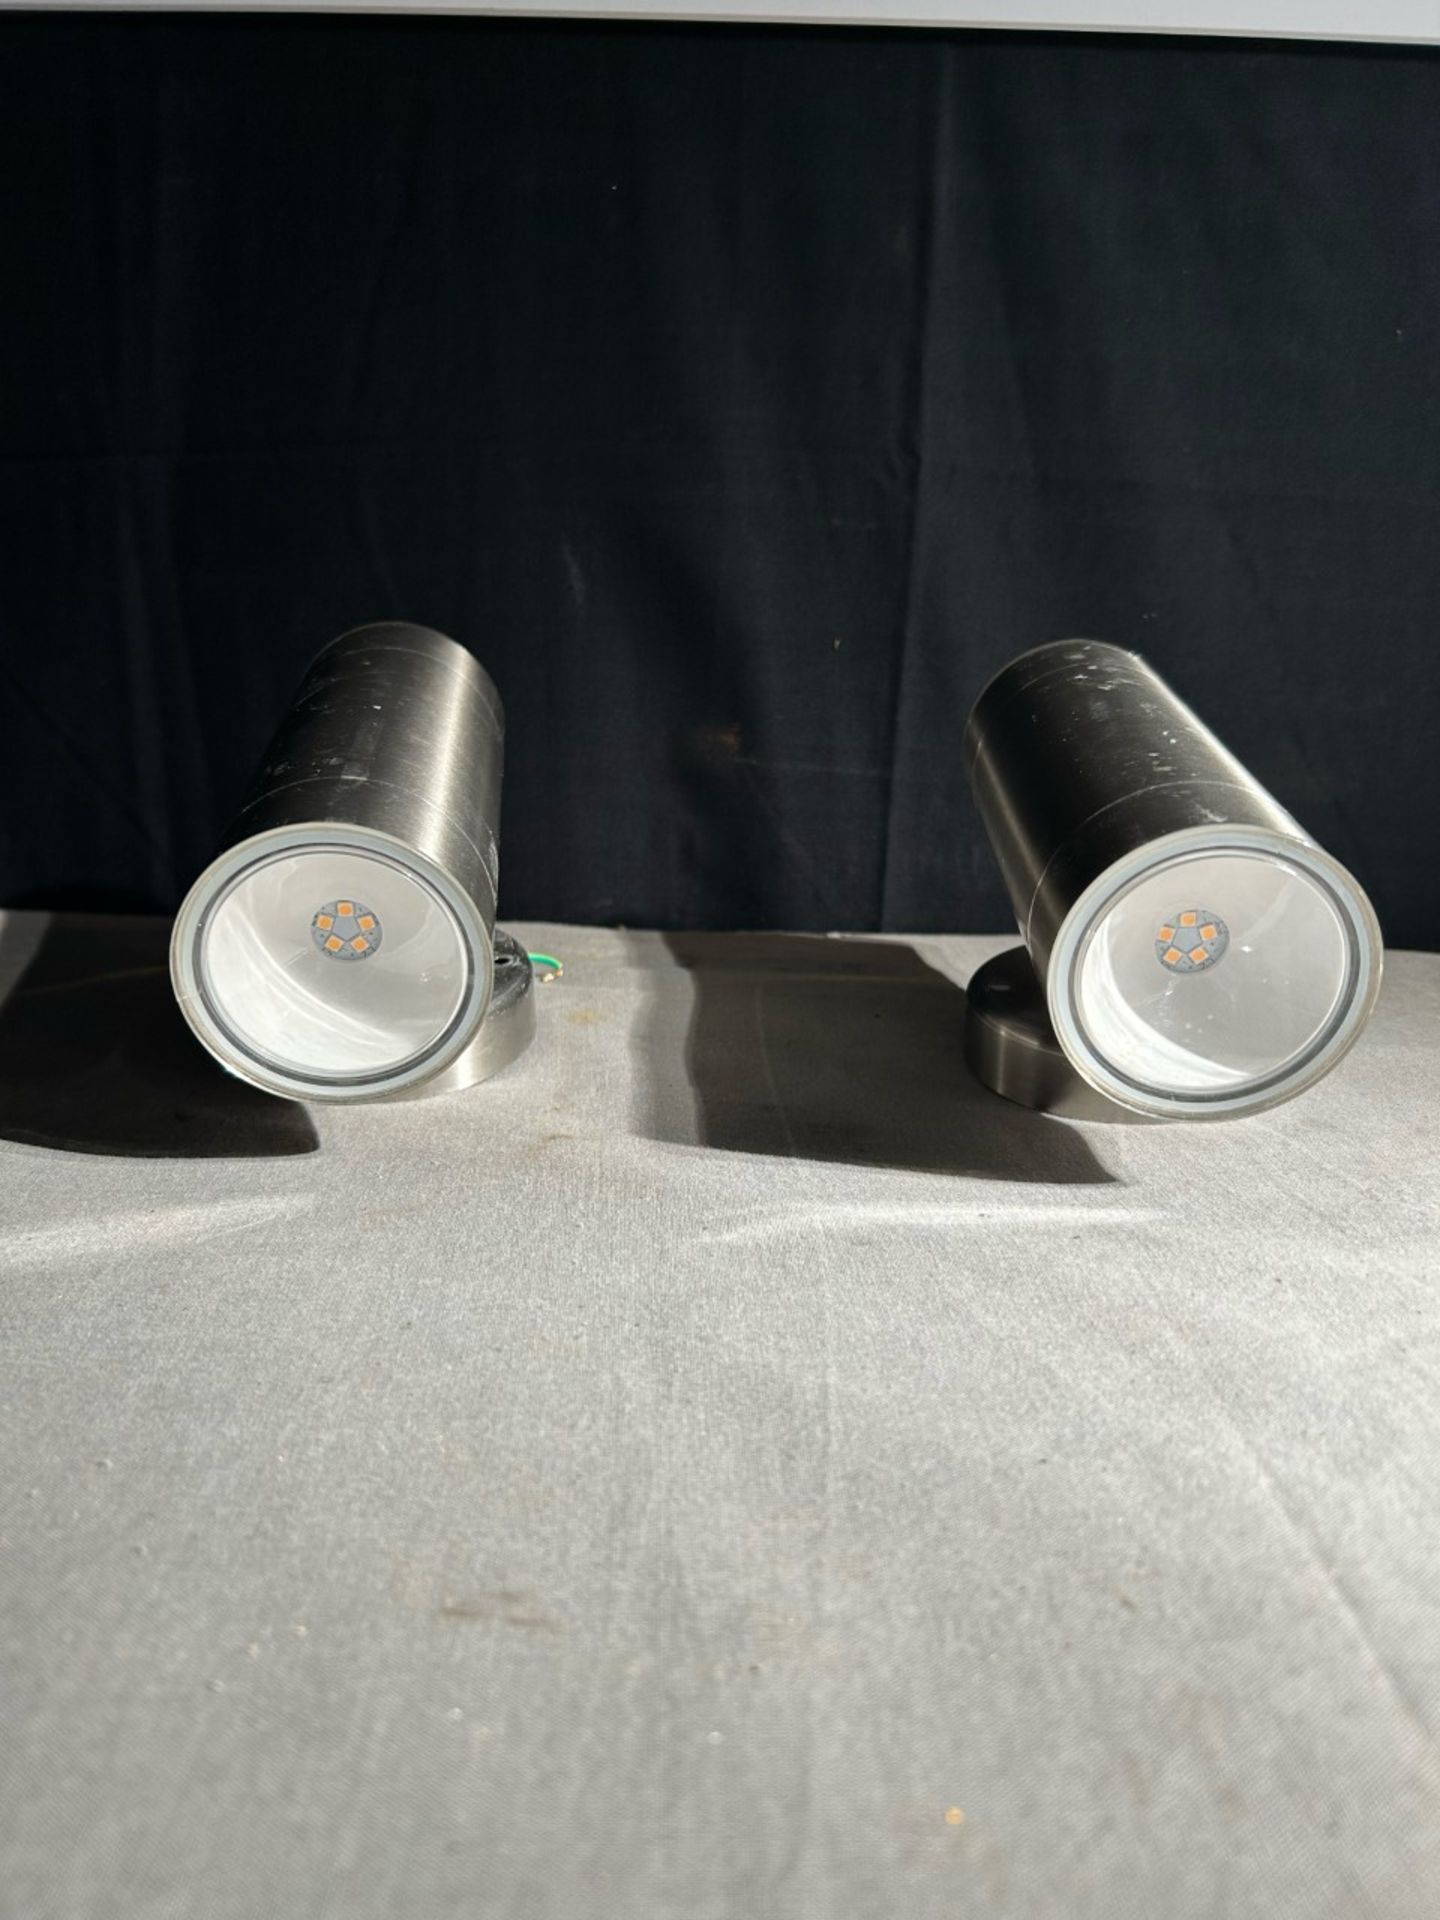 Pair of polished steel up down wall lights. - Image 2 of 2